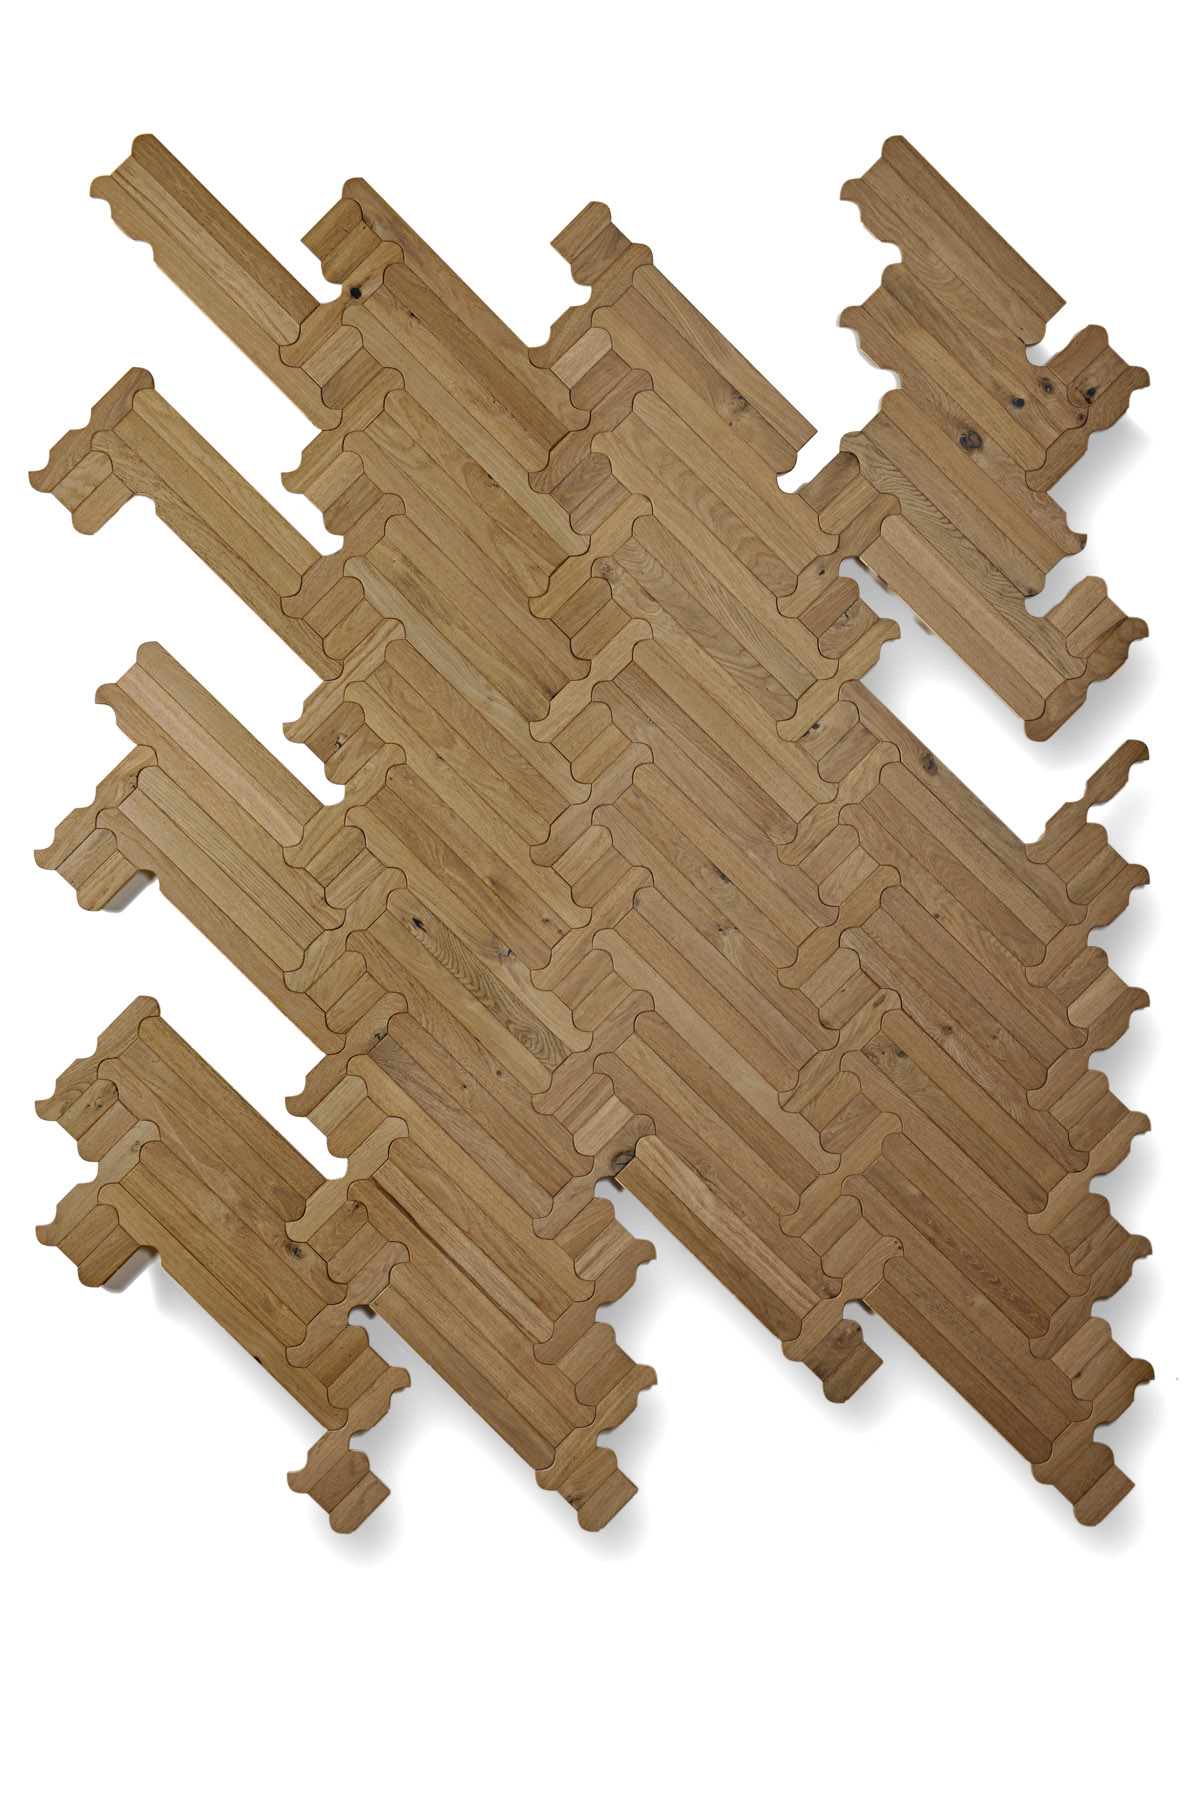 Biscuit Parquet by Patricia Urquiola for Listone Giordano